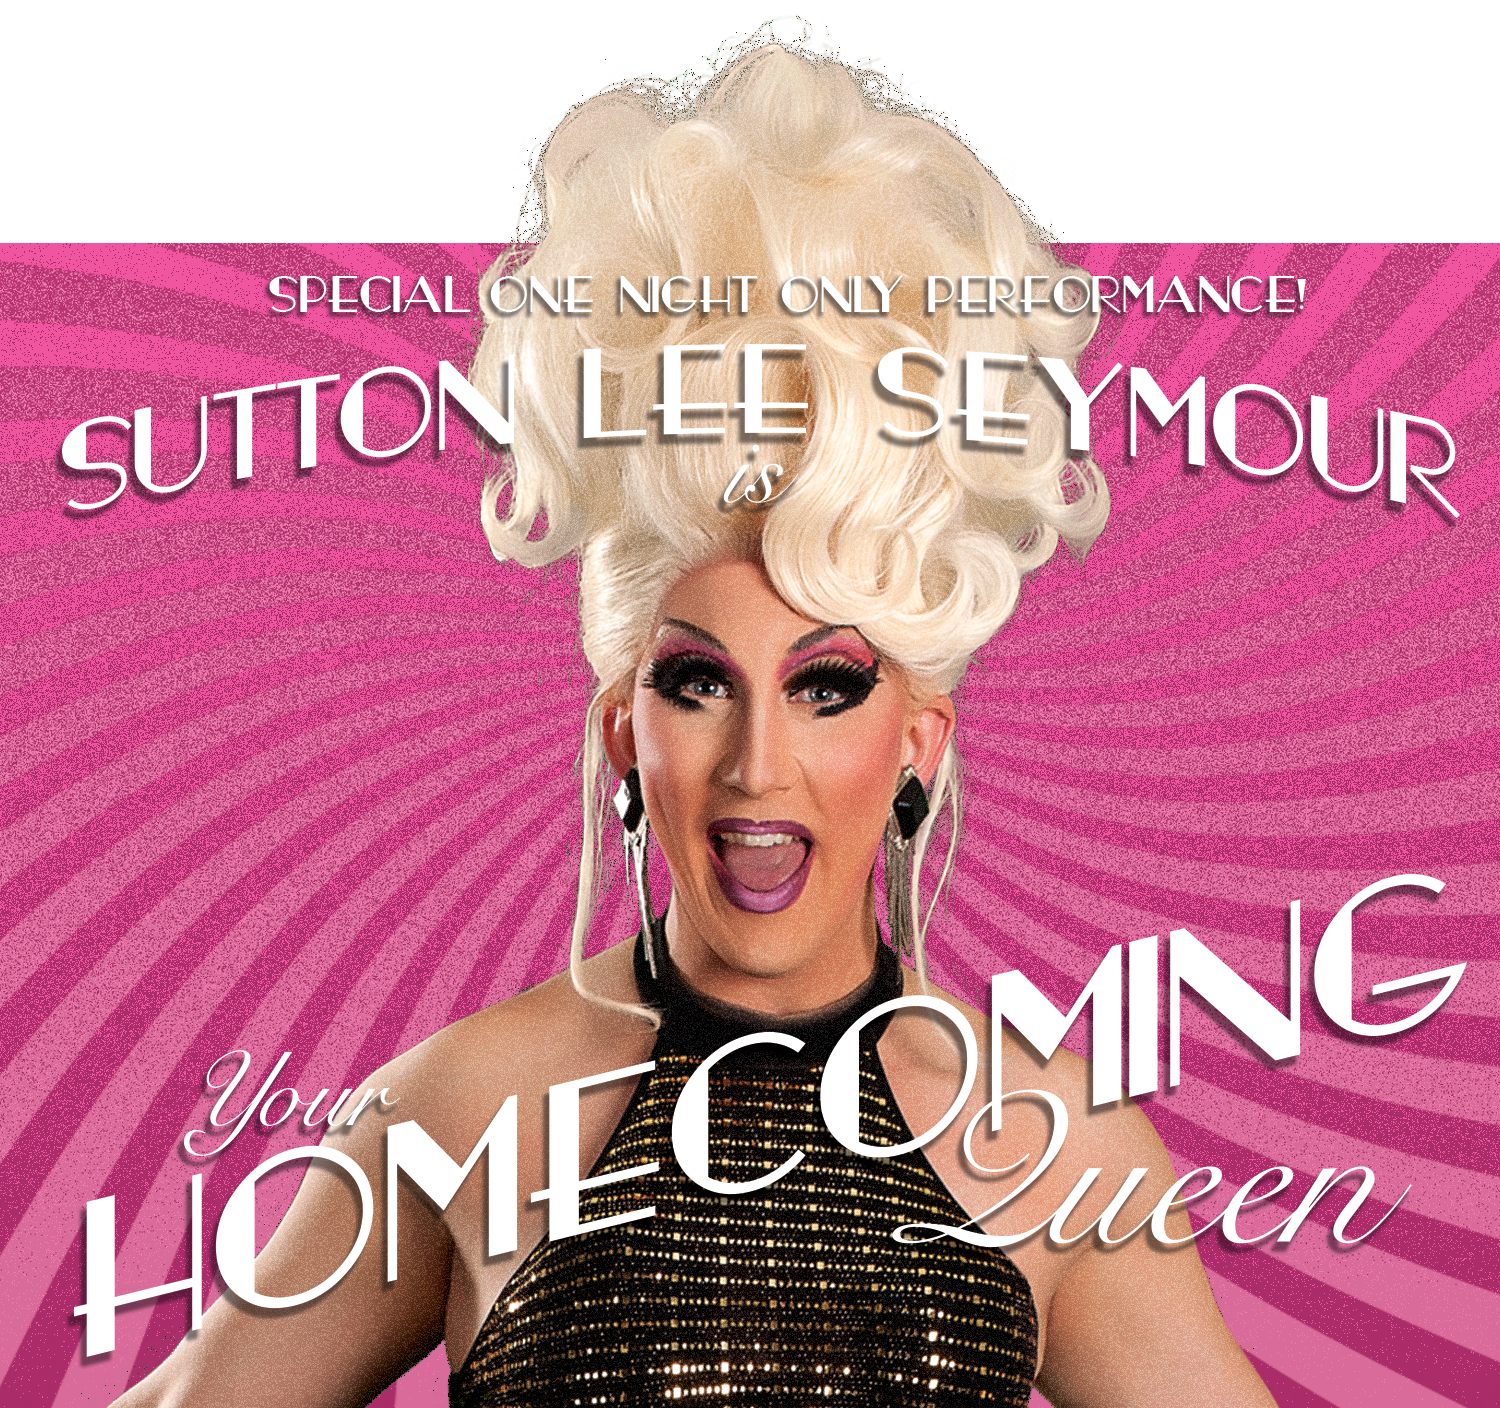 Drag Queen Sutton Lee Seymour in front of a pink background